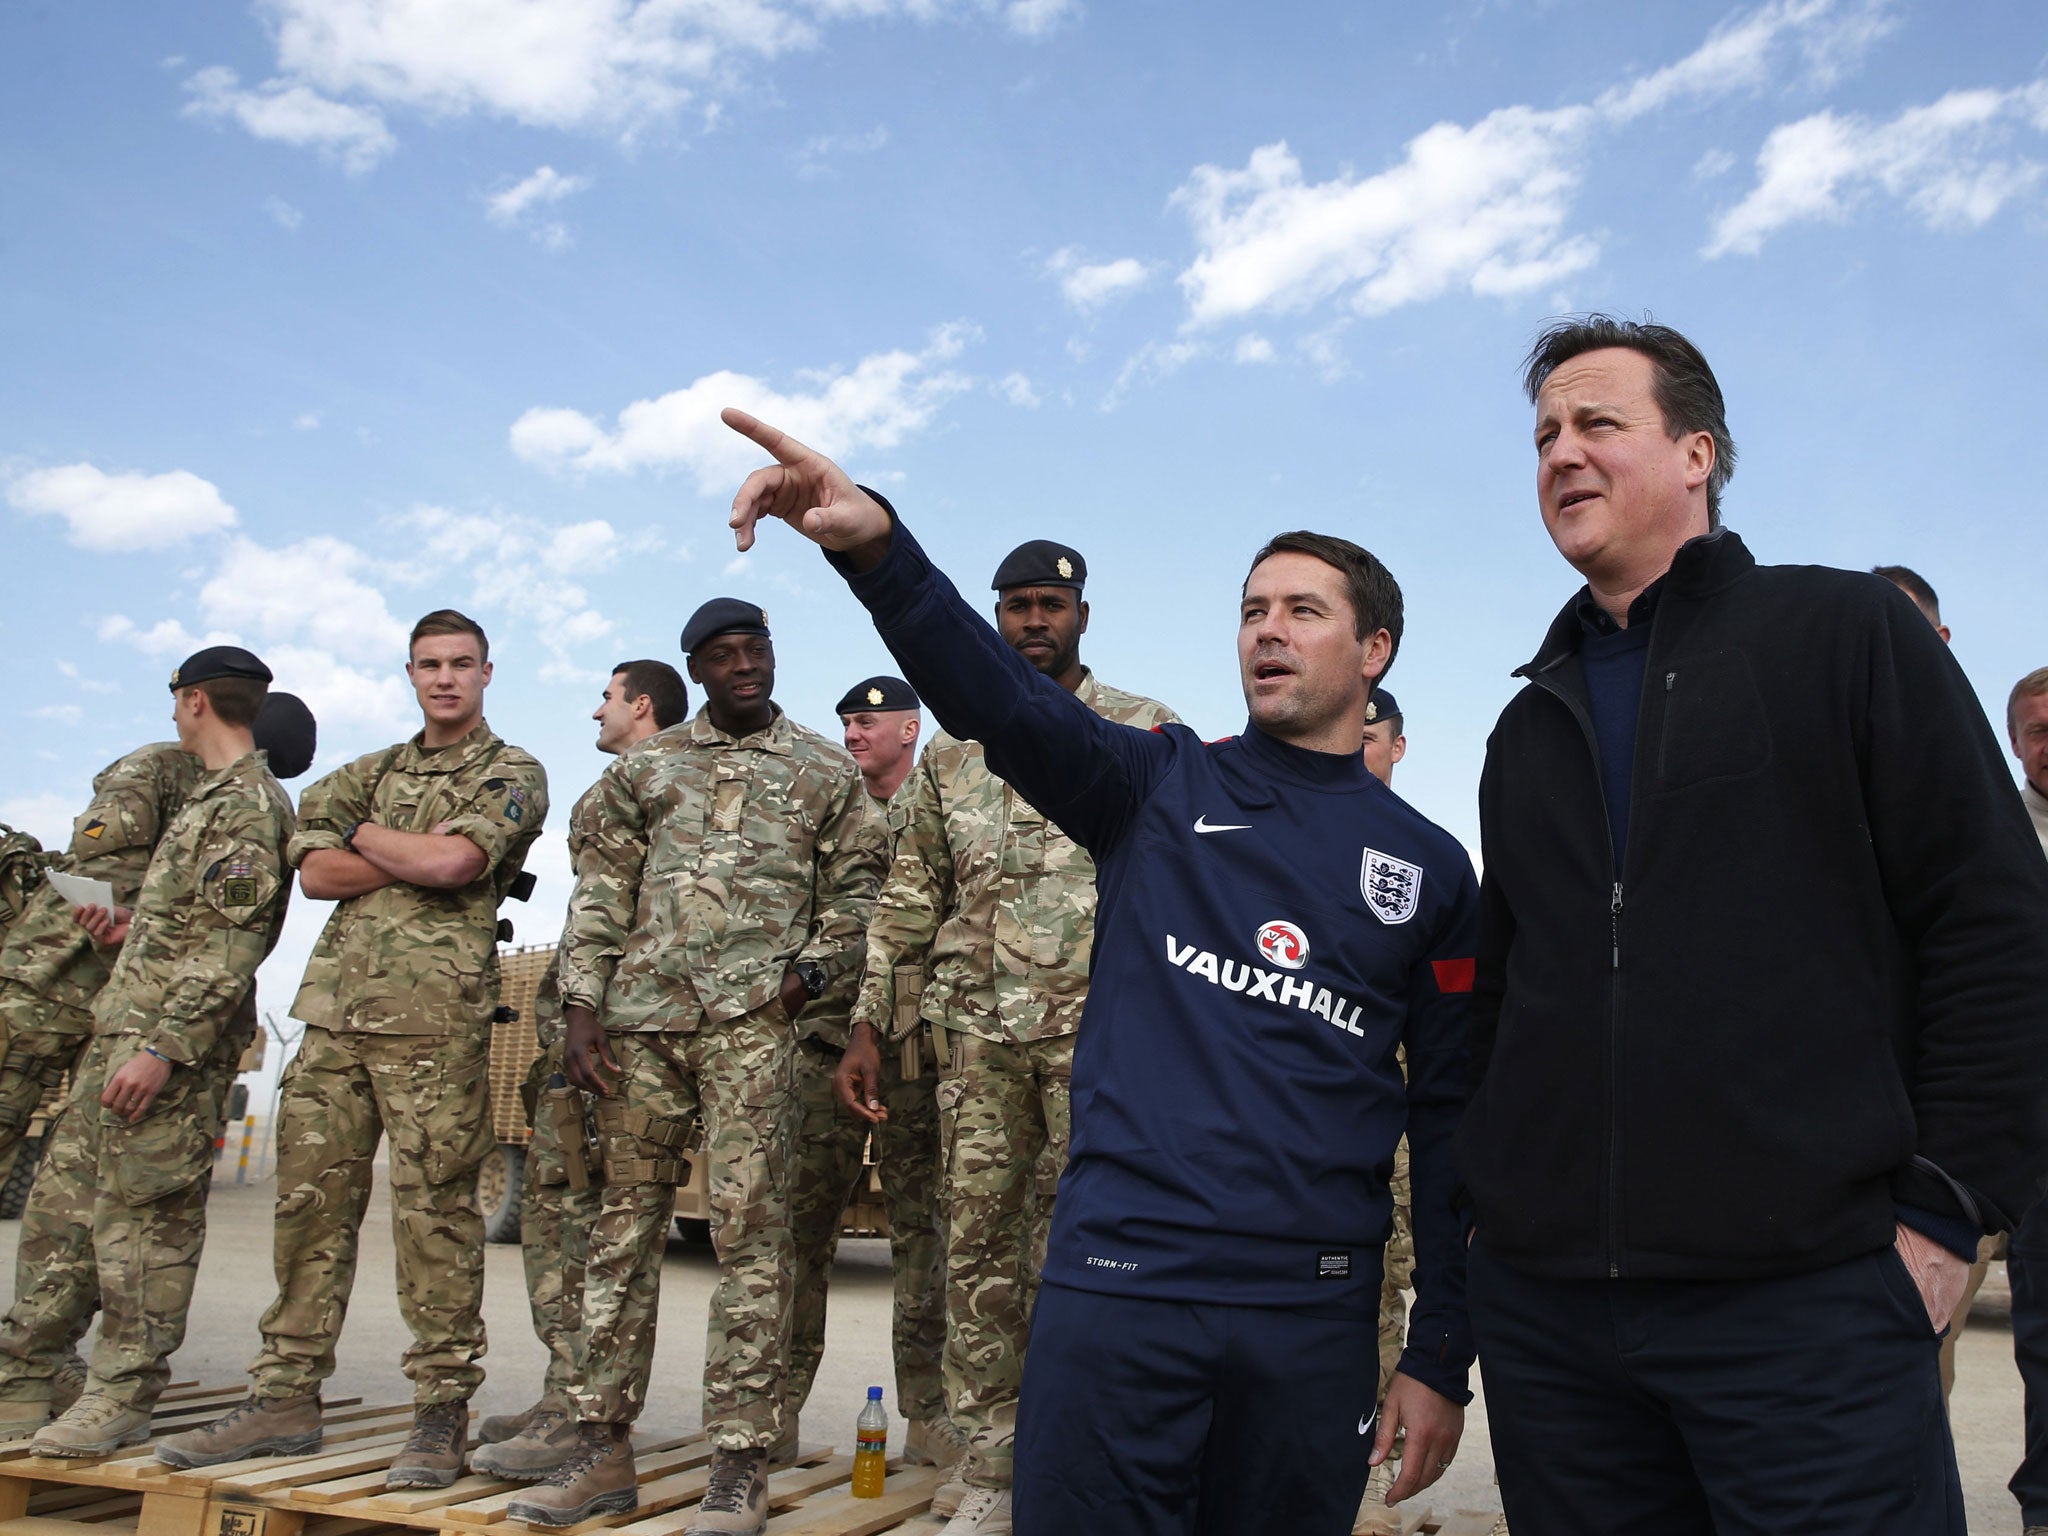 David Cameron and former England footballer Michael Owen visiting Camp Bastion. The PM lauded the 'level of security' established 